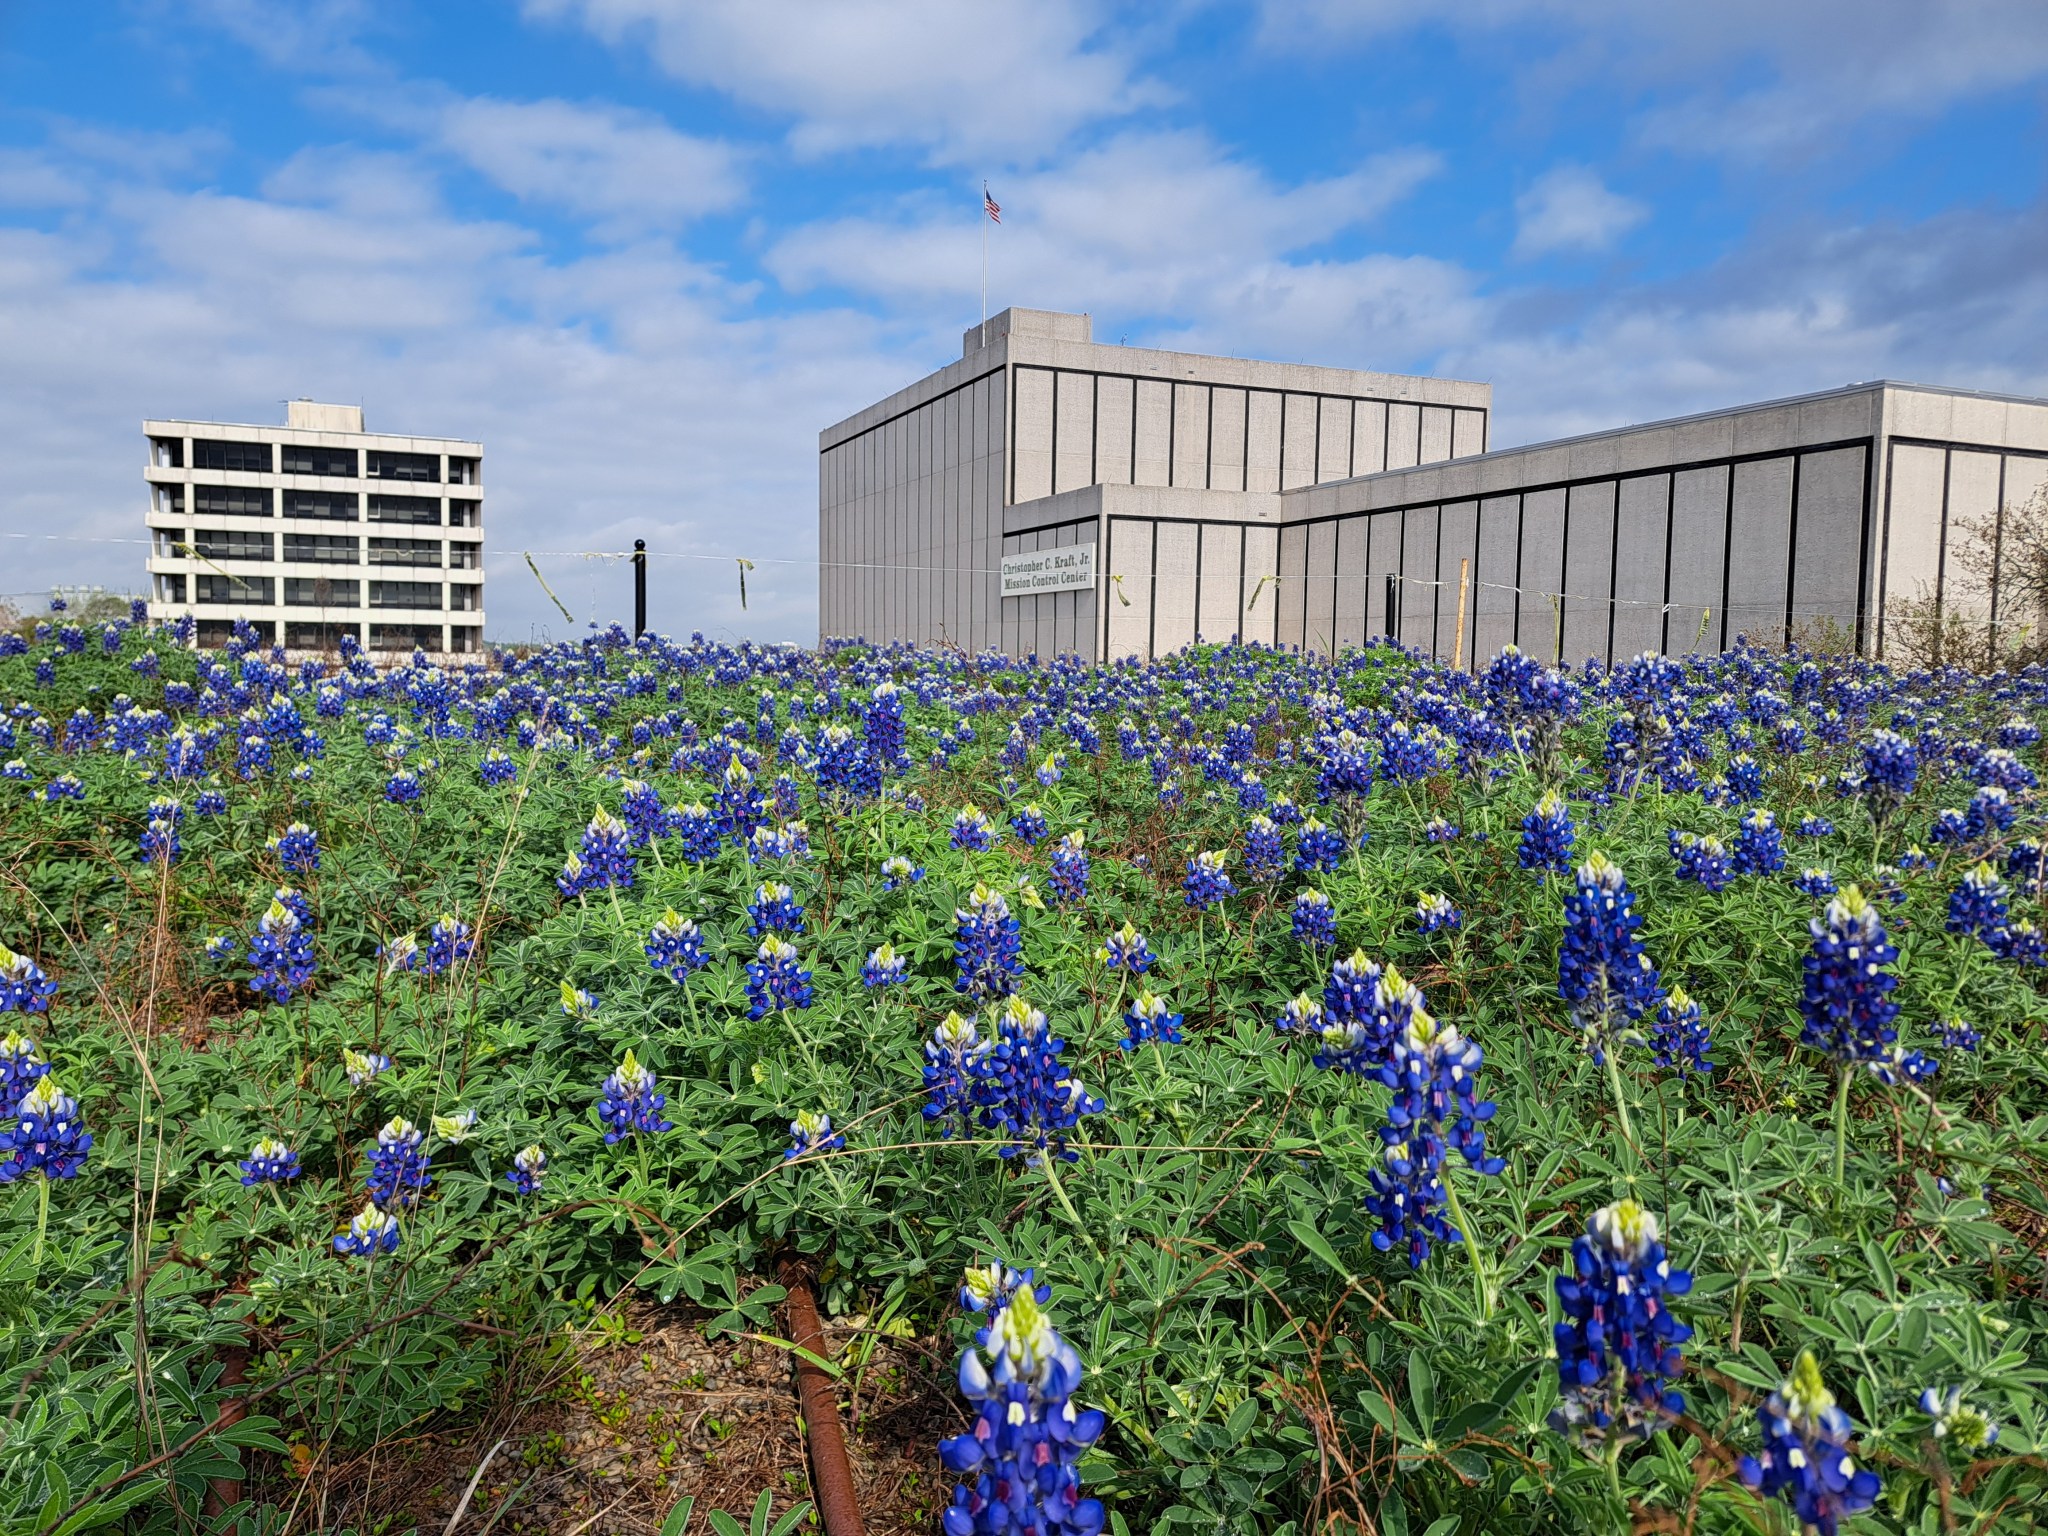 A field of bluebonnets in full bloom stretches across the foreground, creating a sea of blue and green. In the background, there are white buildings with numerous windows. The sky is partly cloudy with patches of blue.